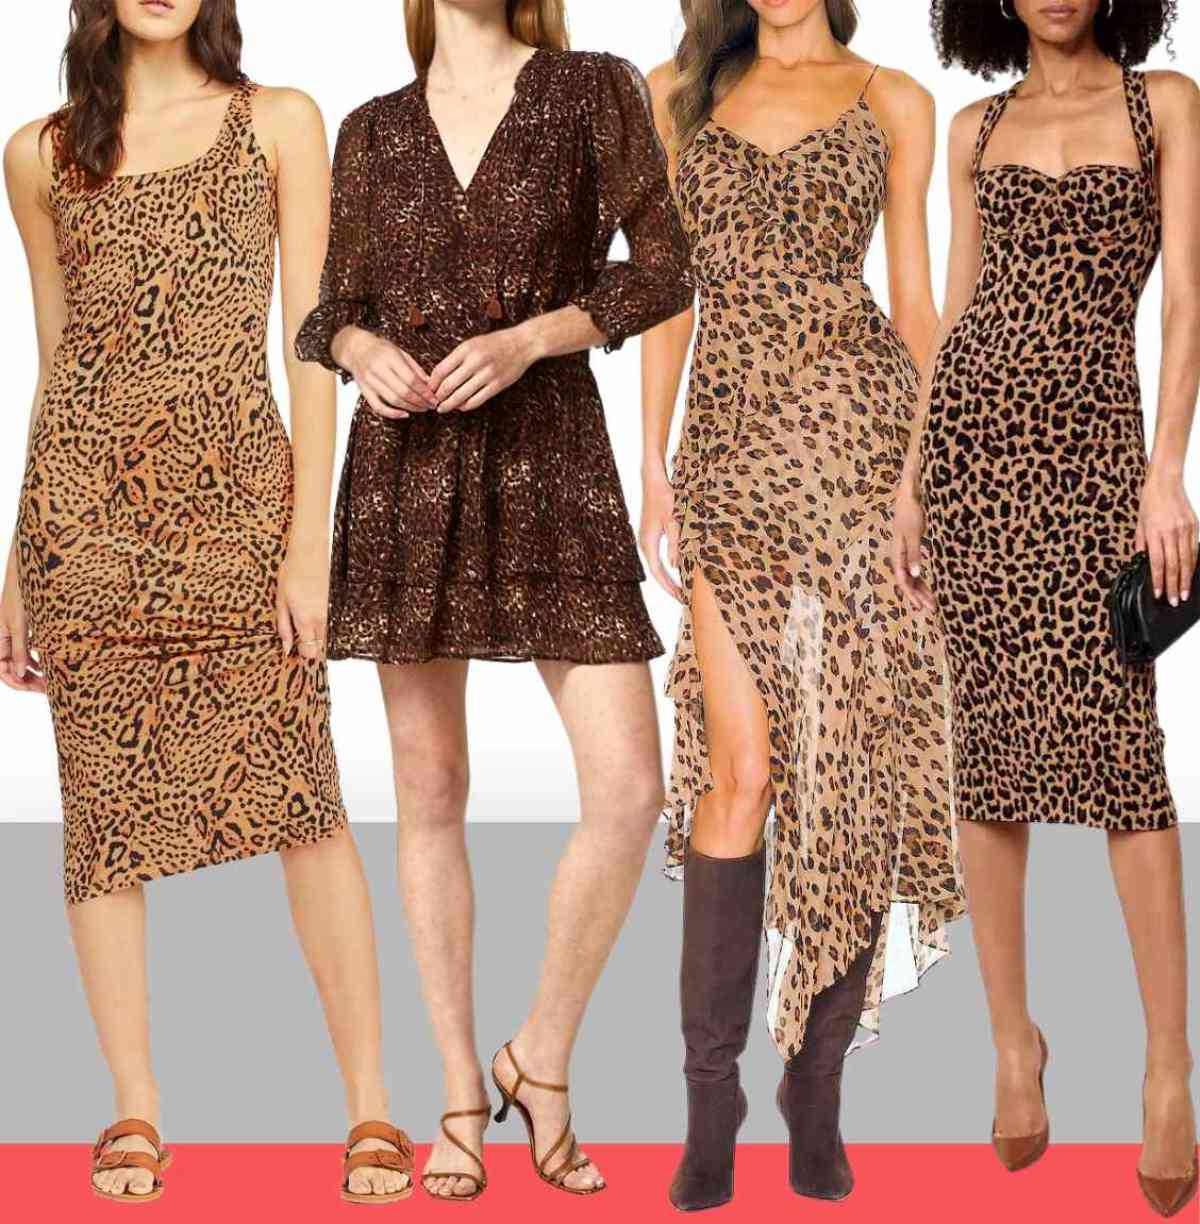 3 women wearing different brown color shoes with leopard print dress outfits.